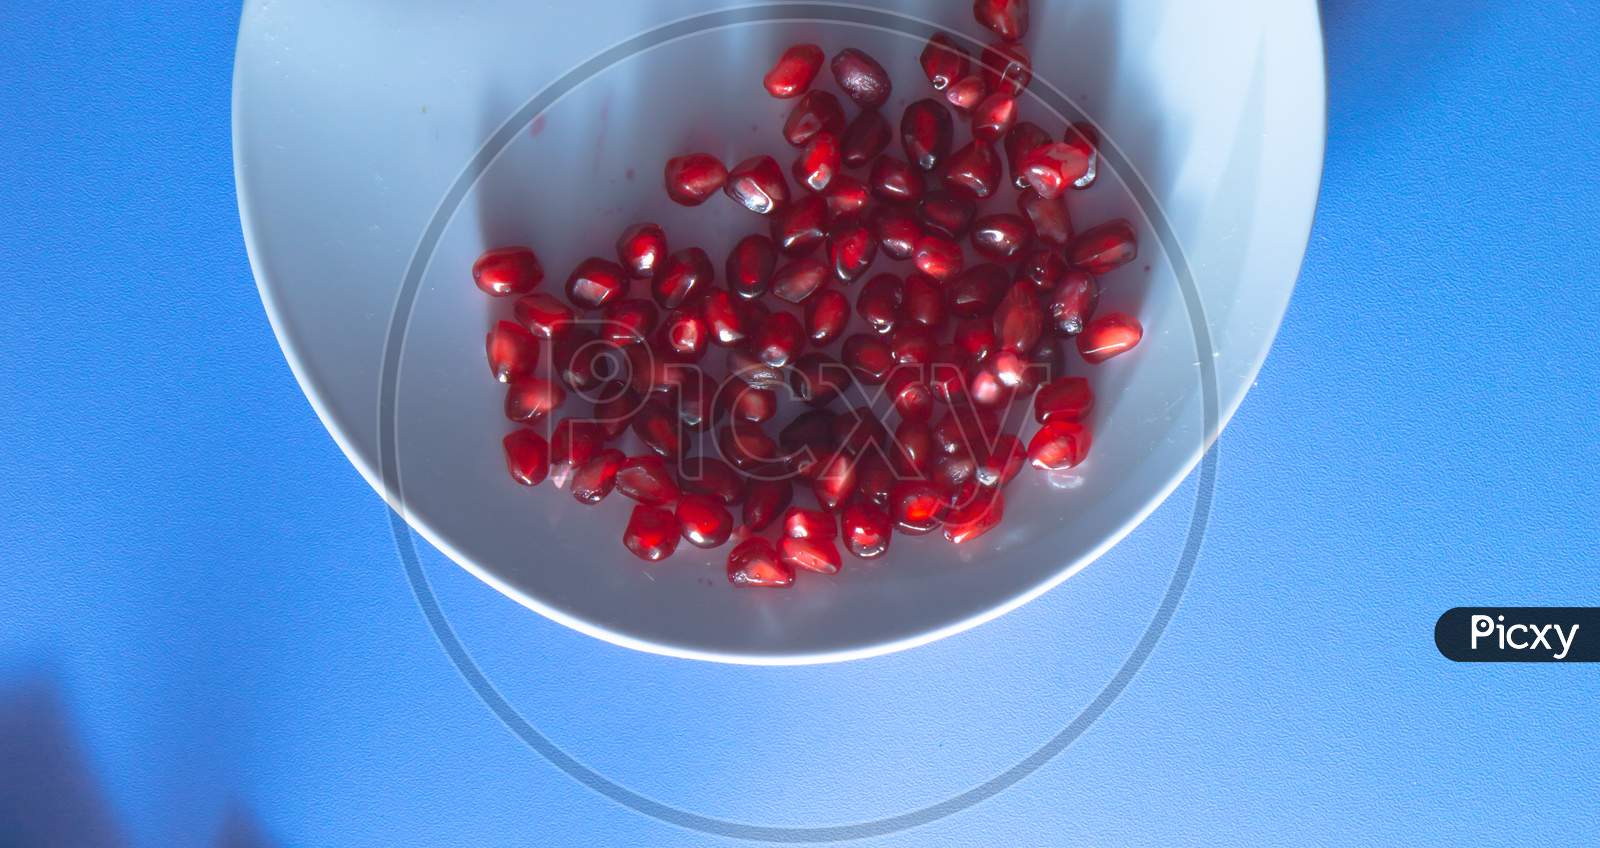 Tasty And Delicious Pomegranate Fruits